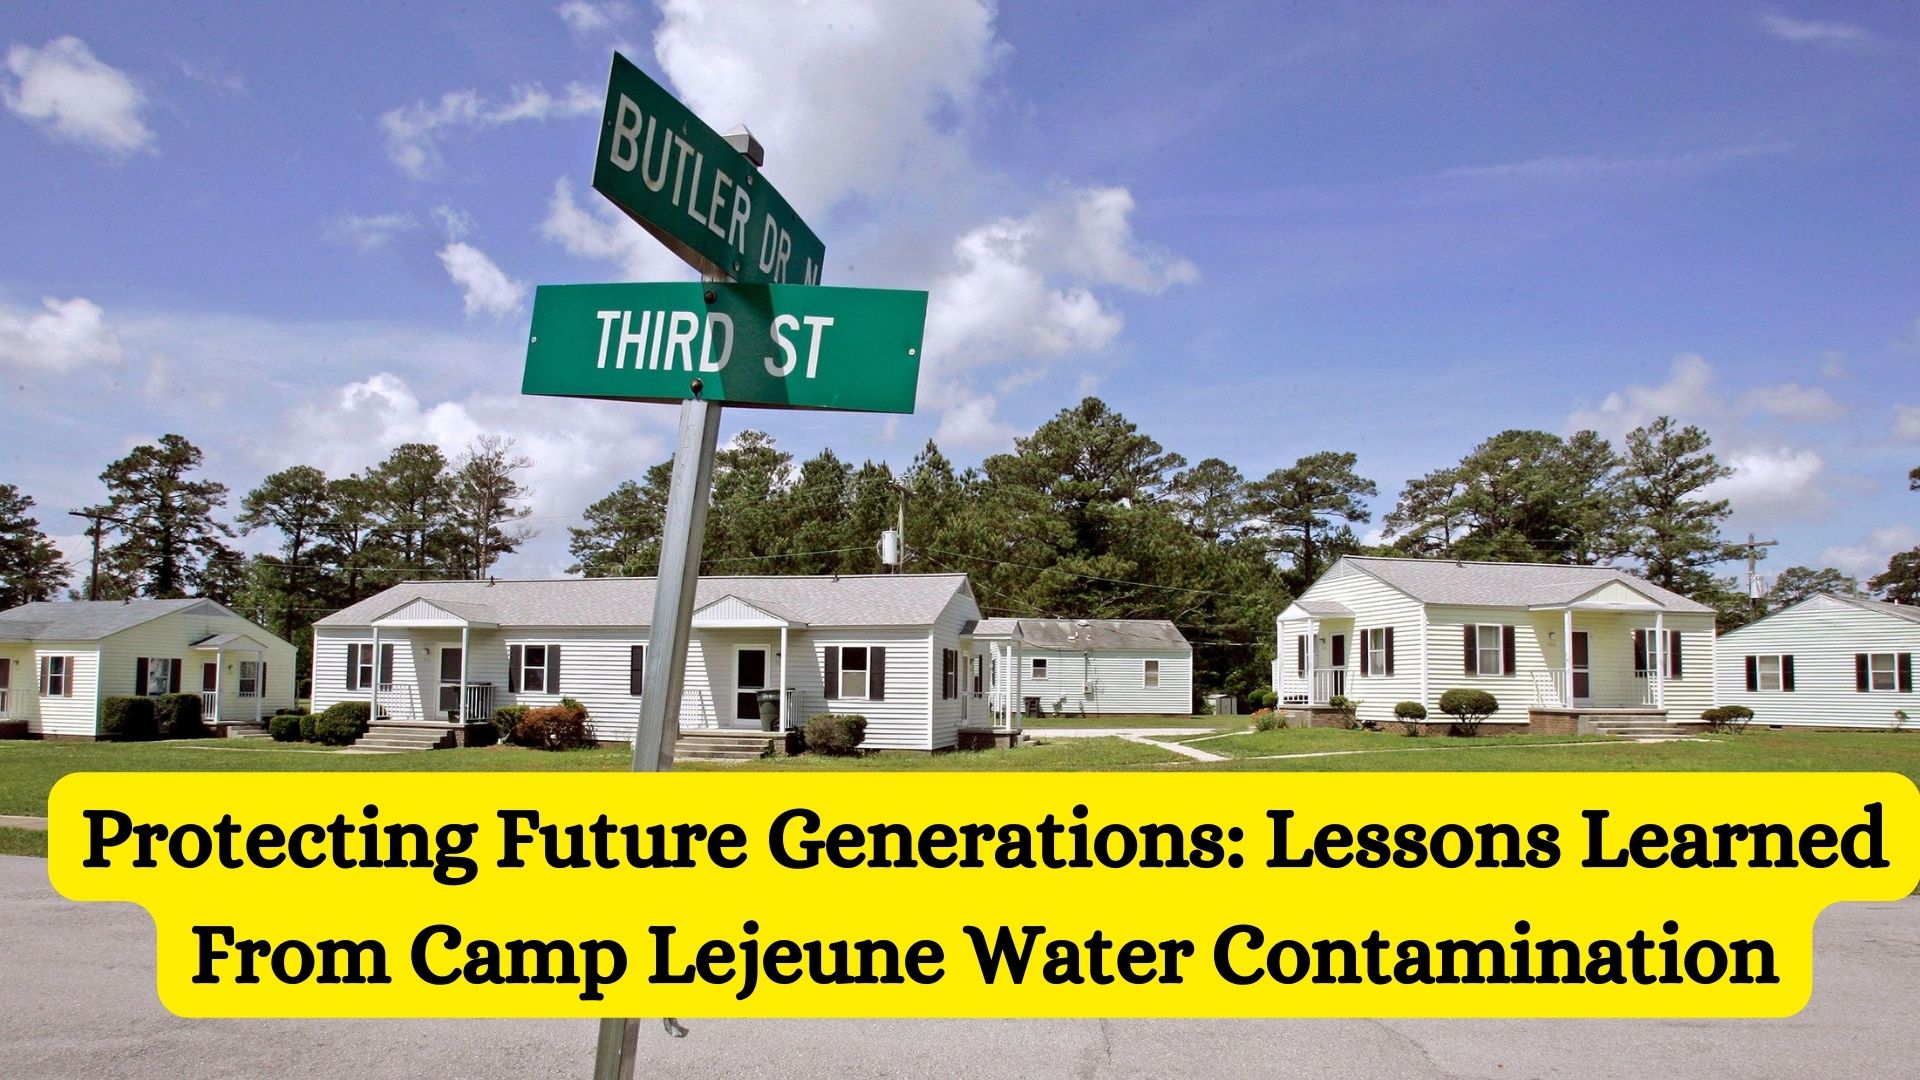 Protecting Future Generations: Lessons Learned From Camp Lejeune Water Contamination